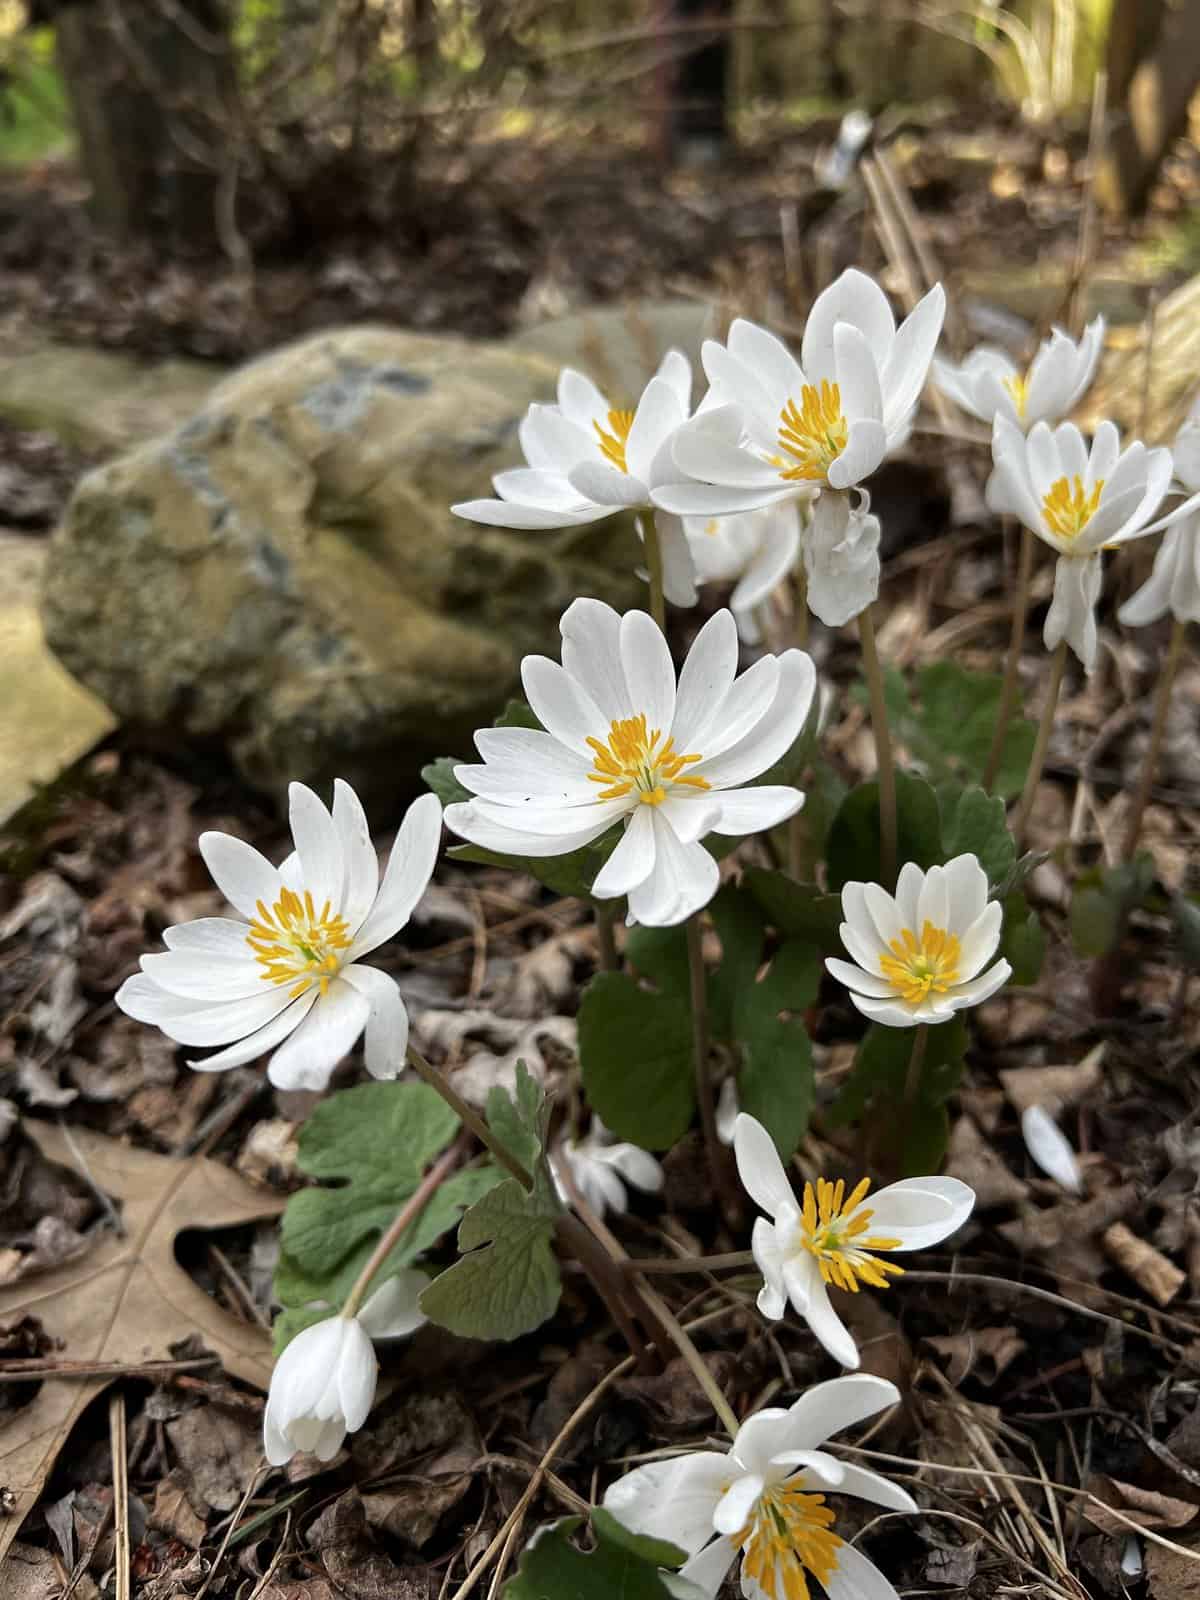 A group of white flowers in a wooded area.